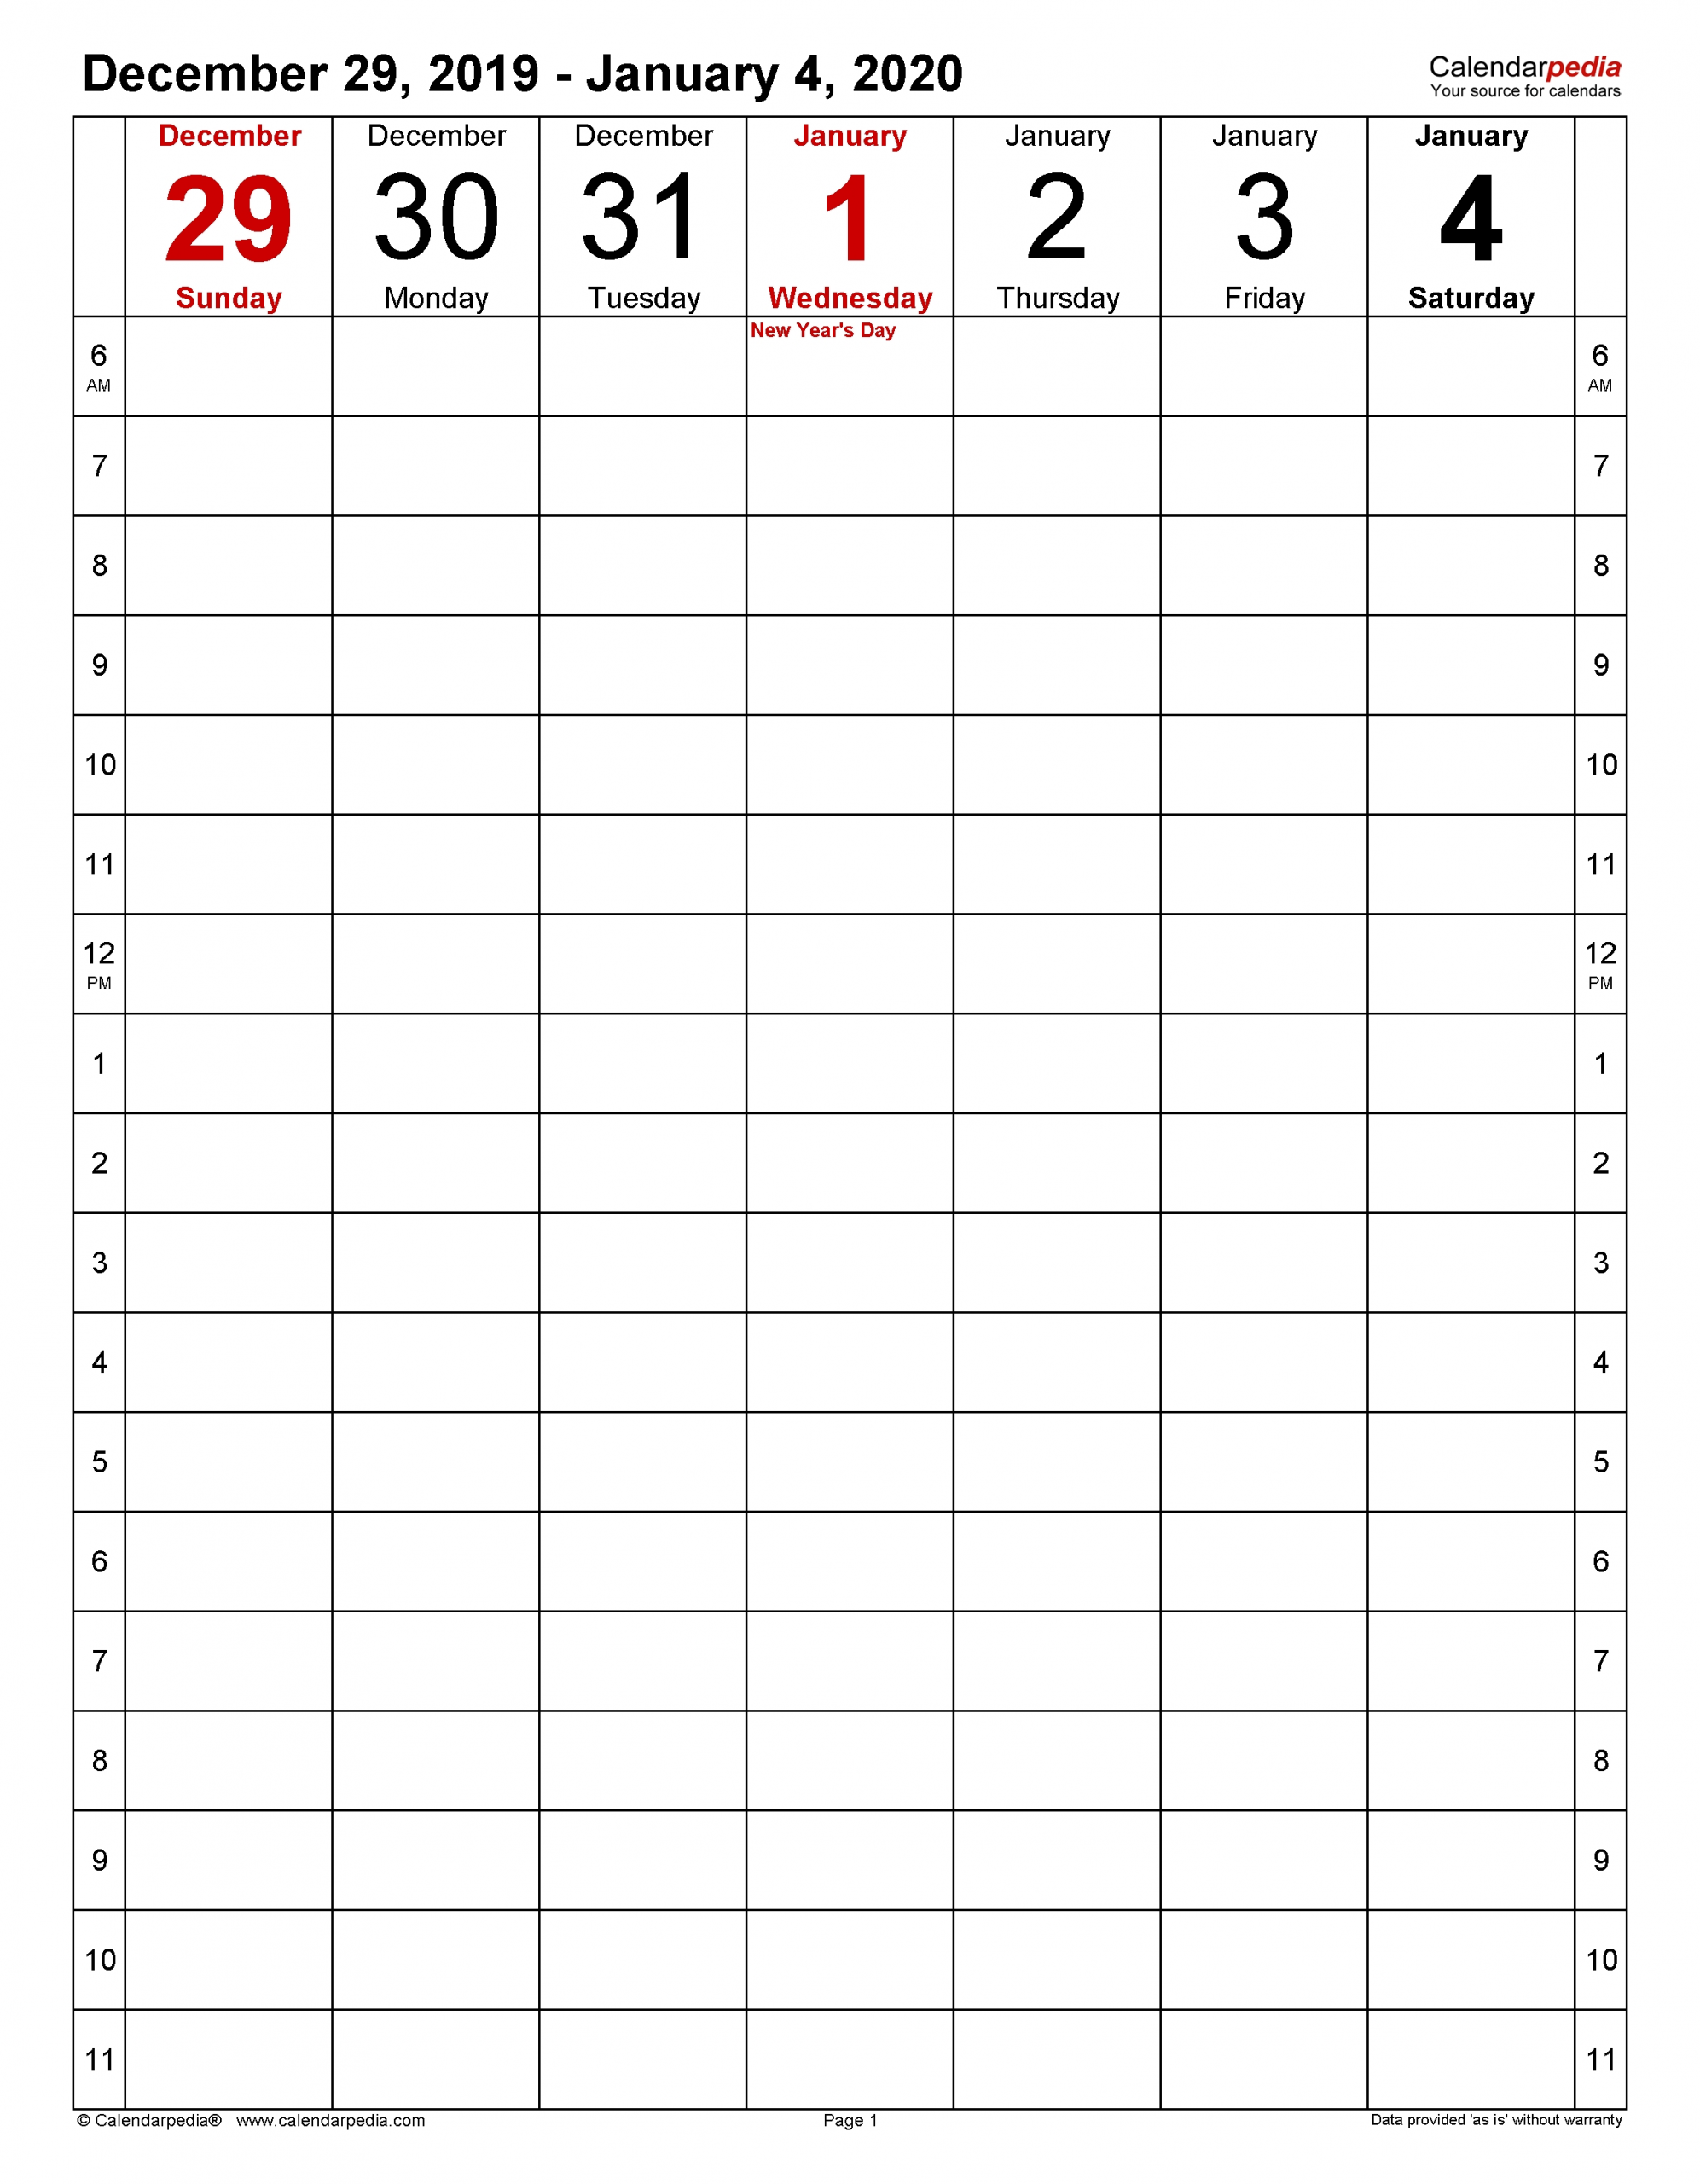 Weekly Calendars 2020 For Word - 12 Free Printable Templates with regard to Free Half Page 2020 Monthly Calanders